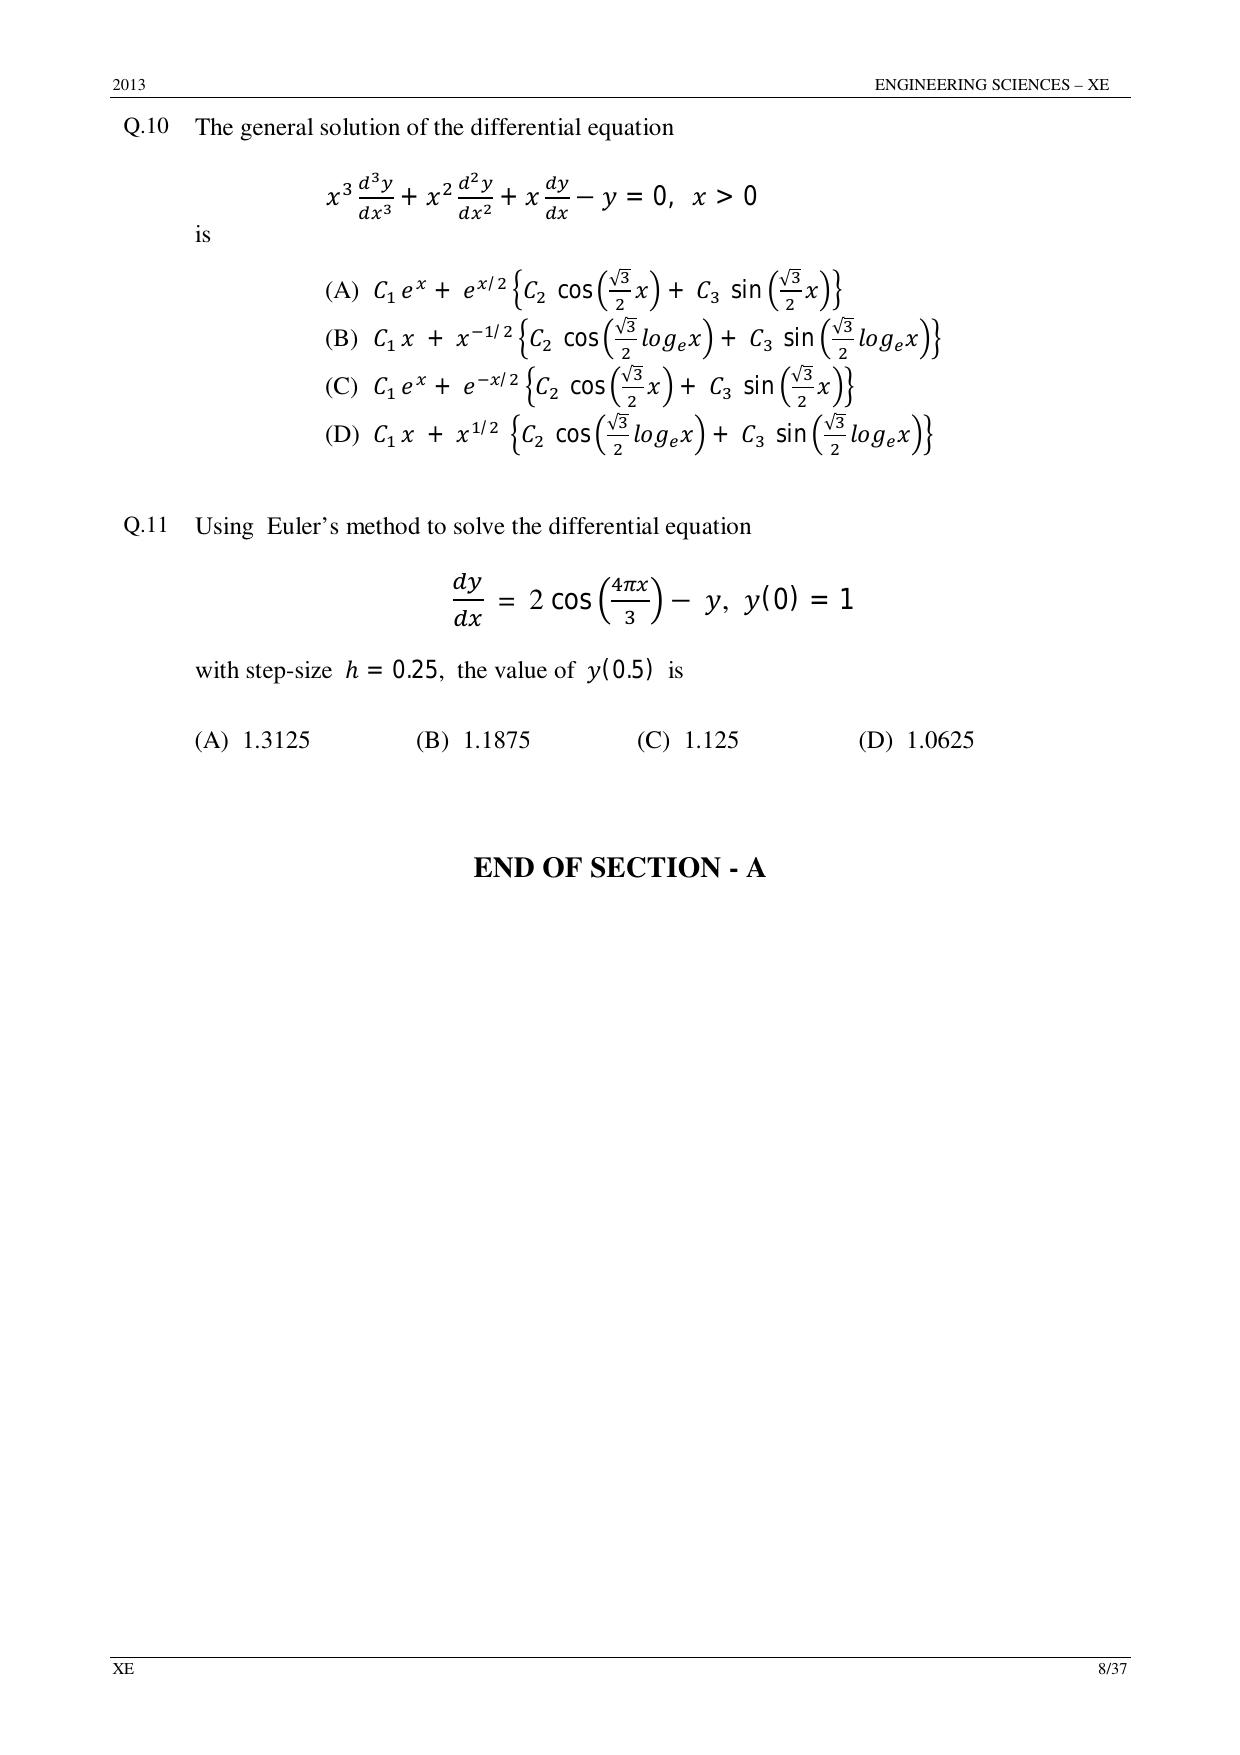 GATE 2013 Engineering Sciences (XE) Question Paper with Answer Key - Page 8